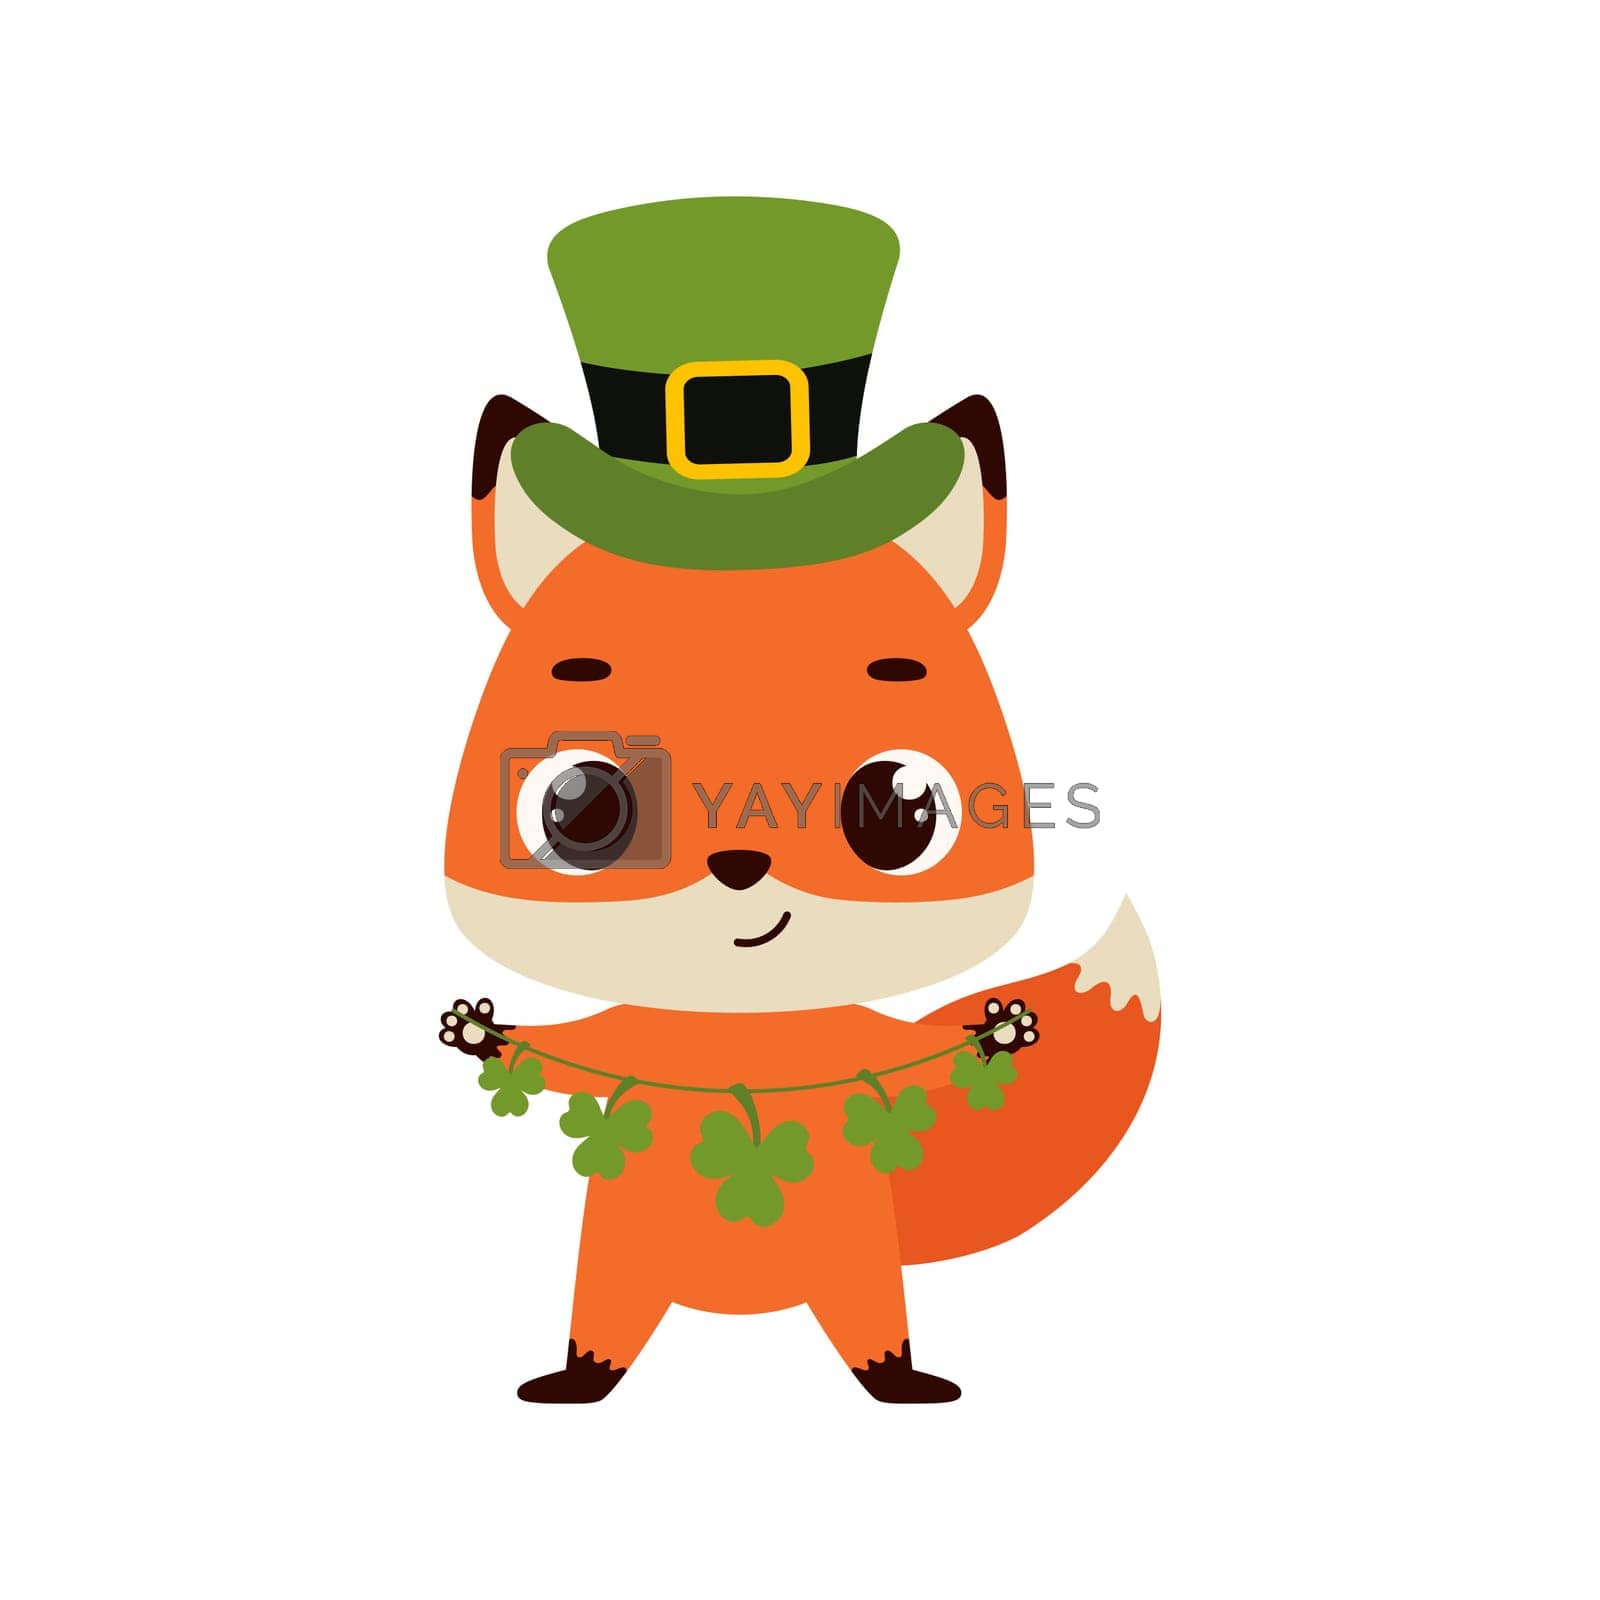 Royalty free image of Cute fox in green leprechaun hat with clover. Irish holiday folklore theme. Cartoon design for cards, decor, shirt, invitation. Vector stock illustration by Melnyk